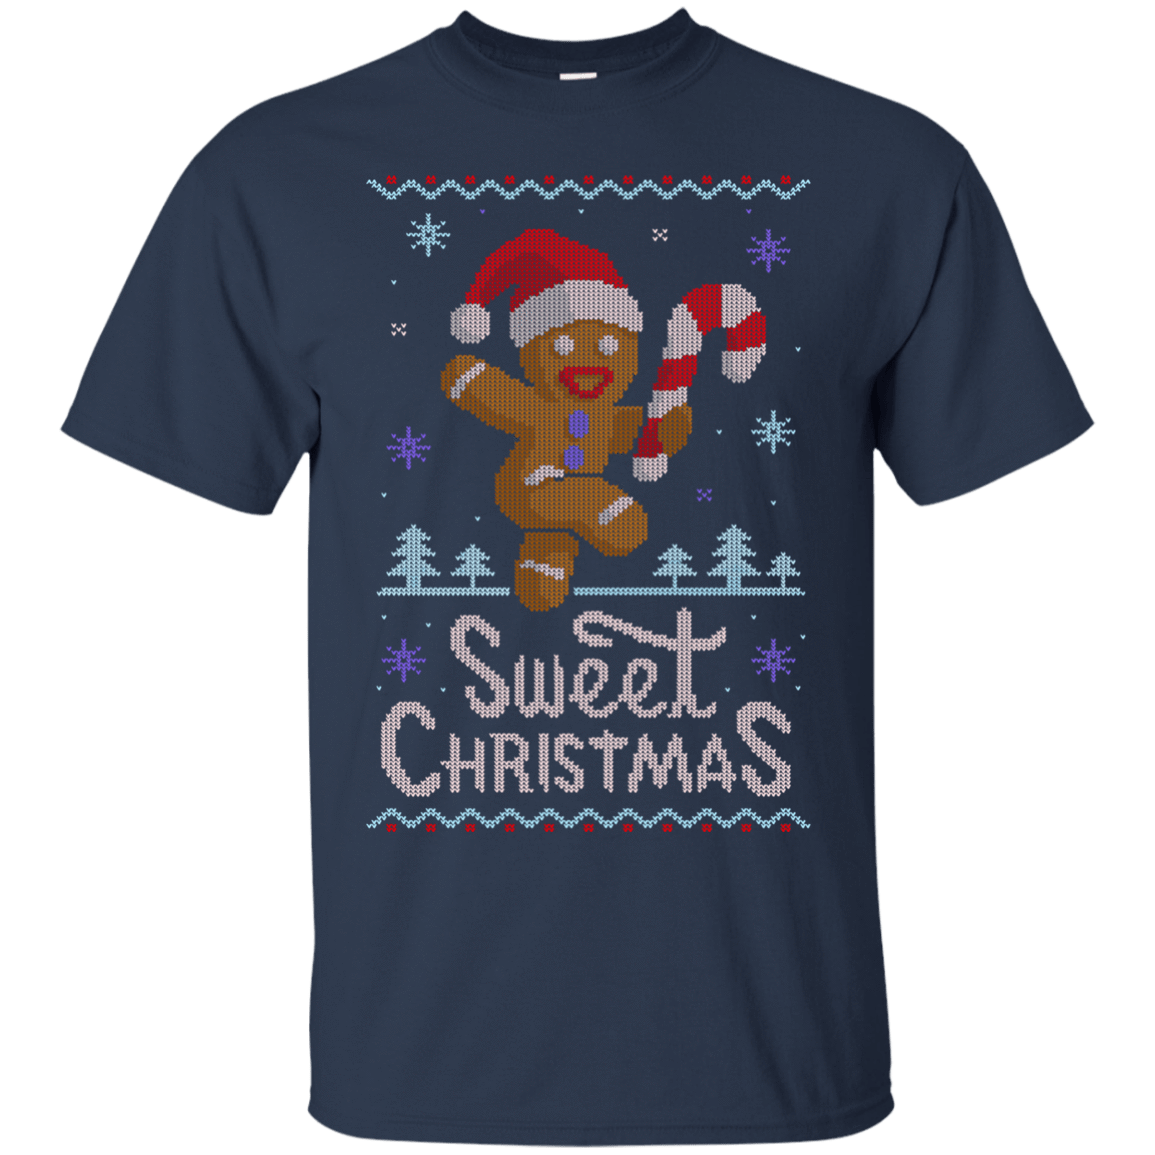 T-Shirts Navy / Small Ginger Bread Sweater T-Shirt